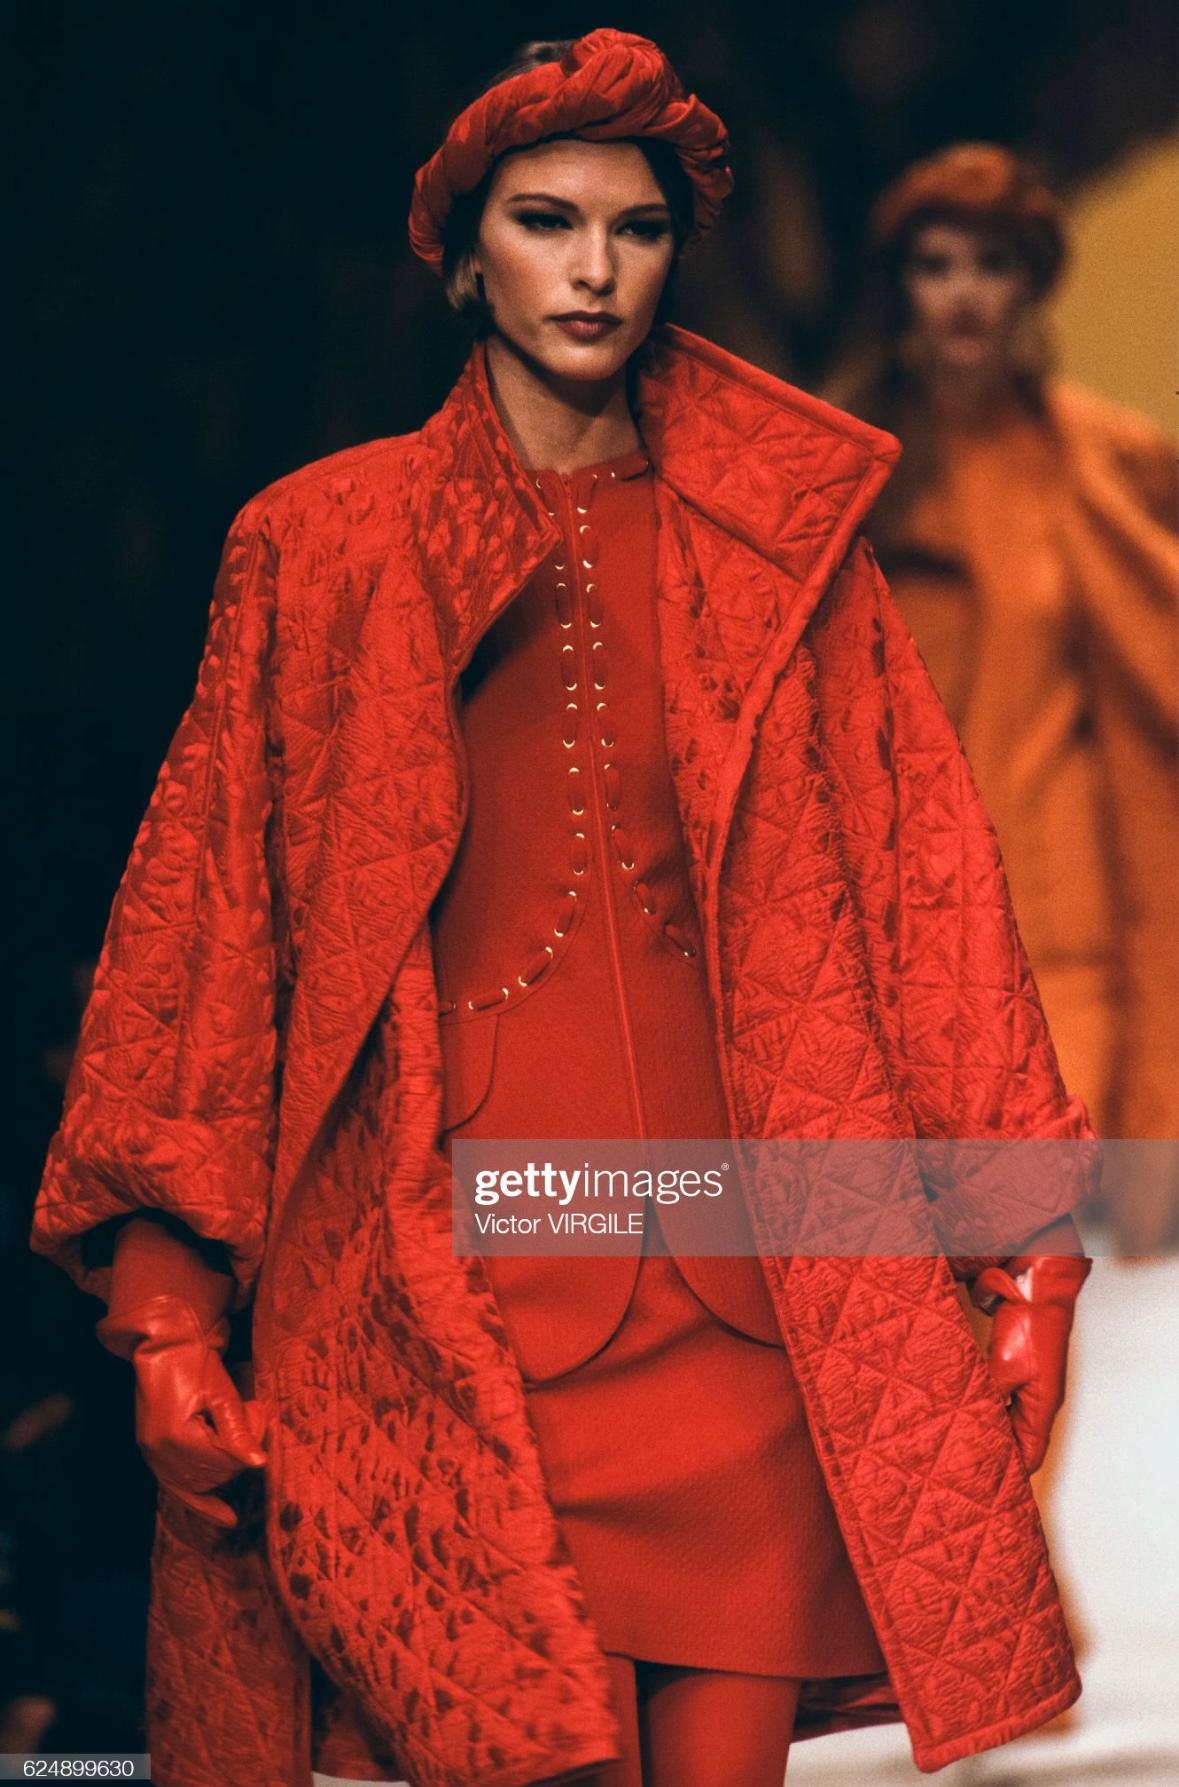 F/W 1992 Valentino Garavani Runway Zodiac Red Lace Up Horoscope Blazer In Excellent Condition For Sale In West Hollywood, CA